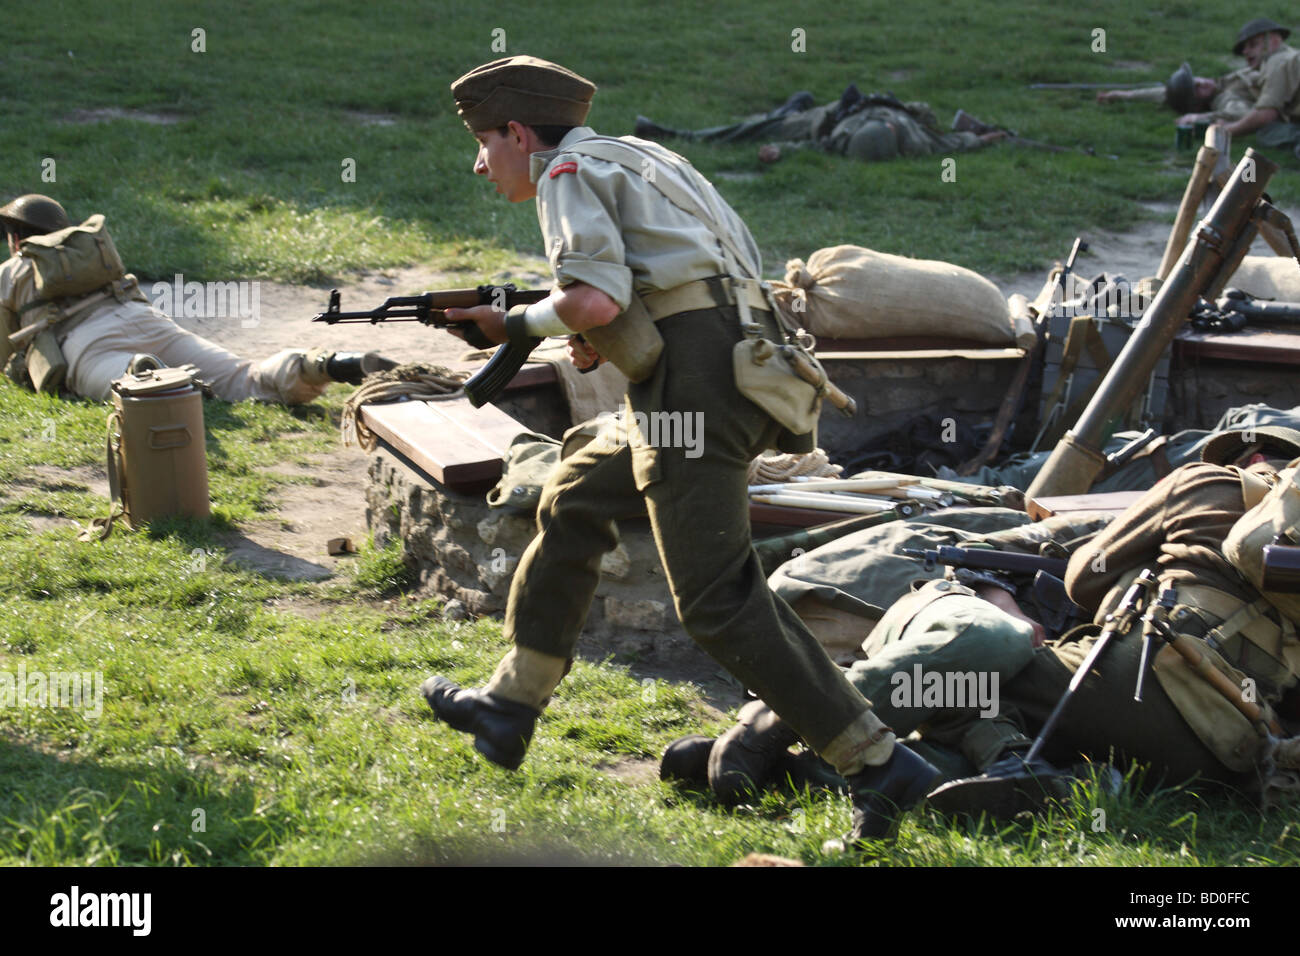 Re-enactment of important second war act - Battle of Monte Cassino. Annual event in Ogrodzieniec, Poland. Stock Photo